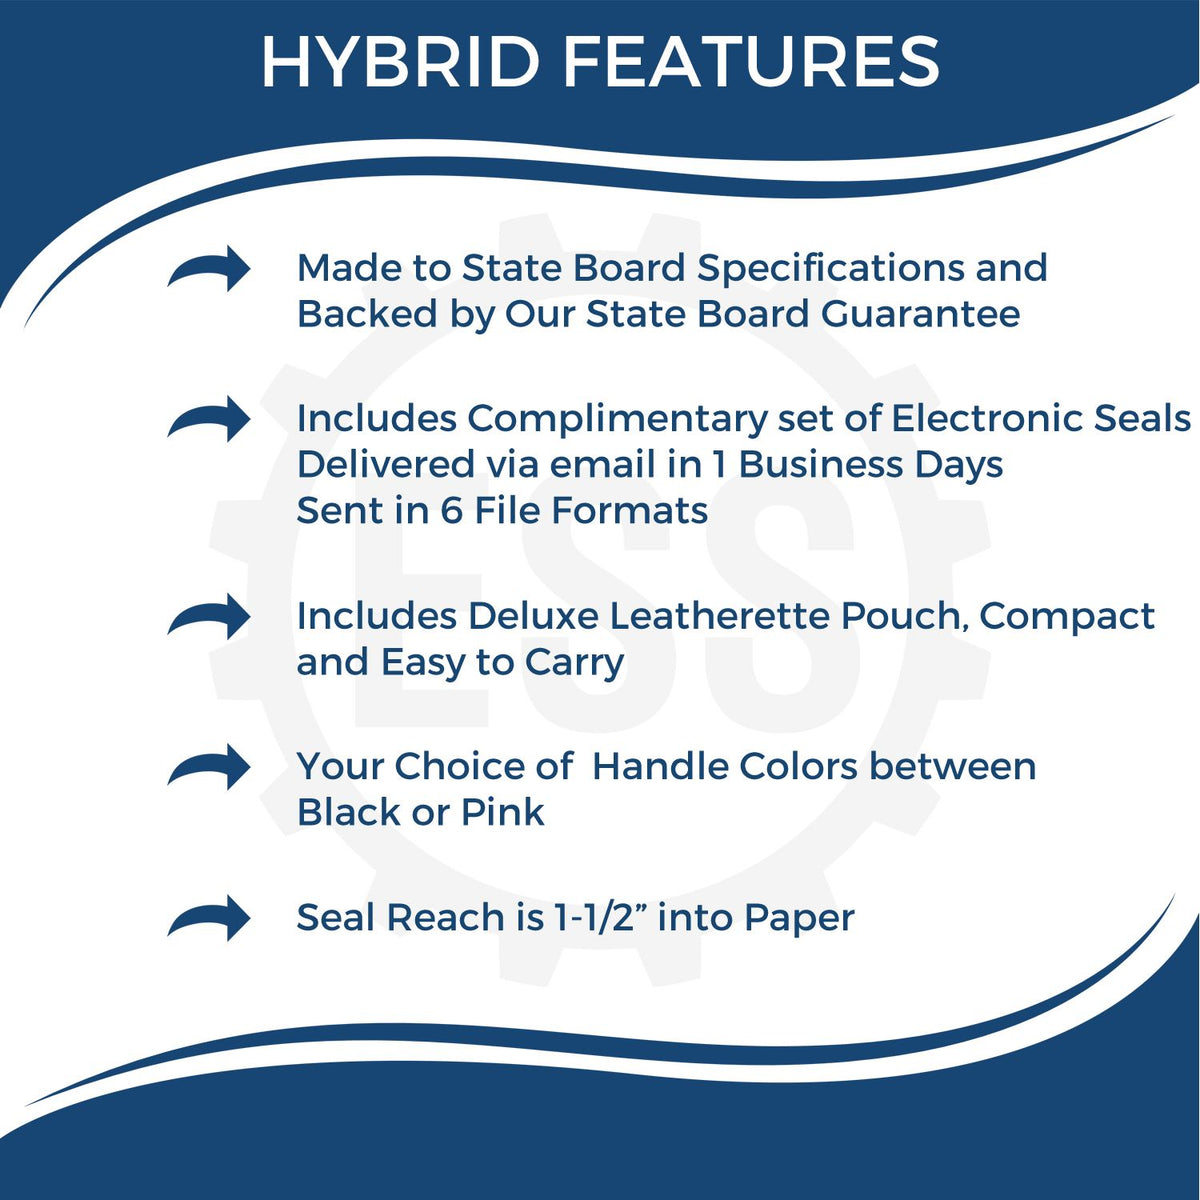 A picture of an infographic highlighting the selling points for the Hybrid Nevada Architect Seal